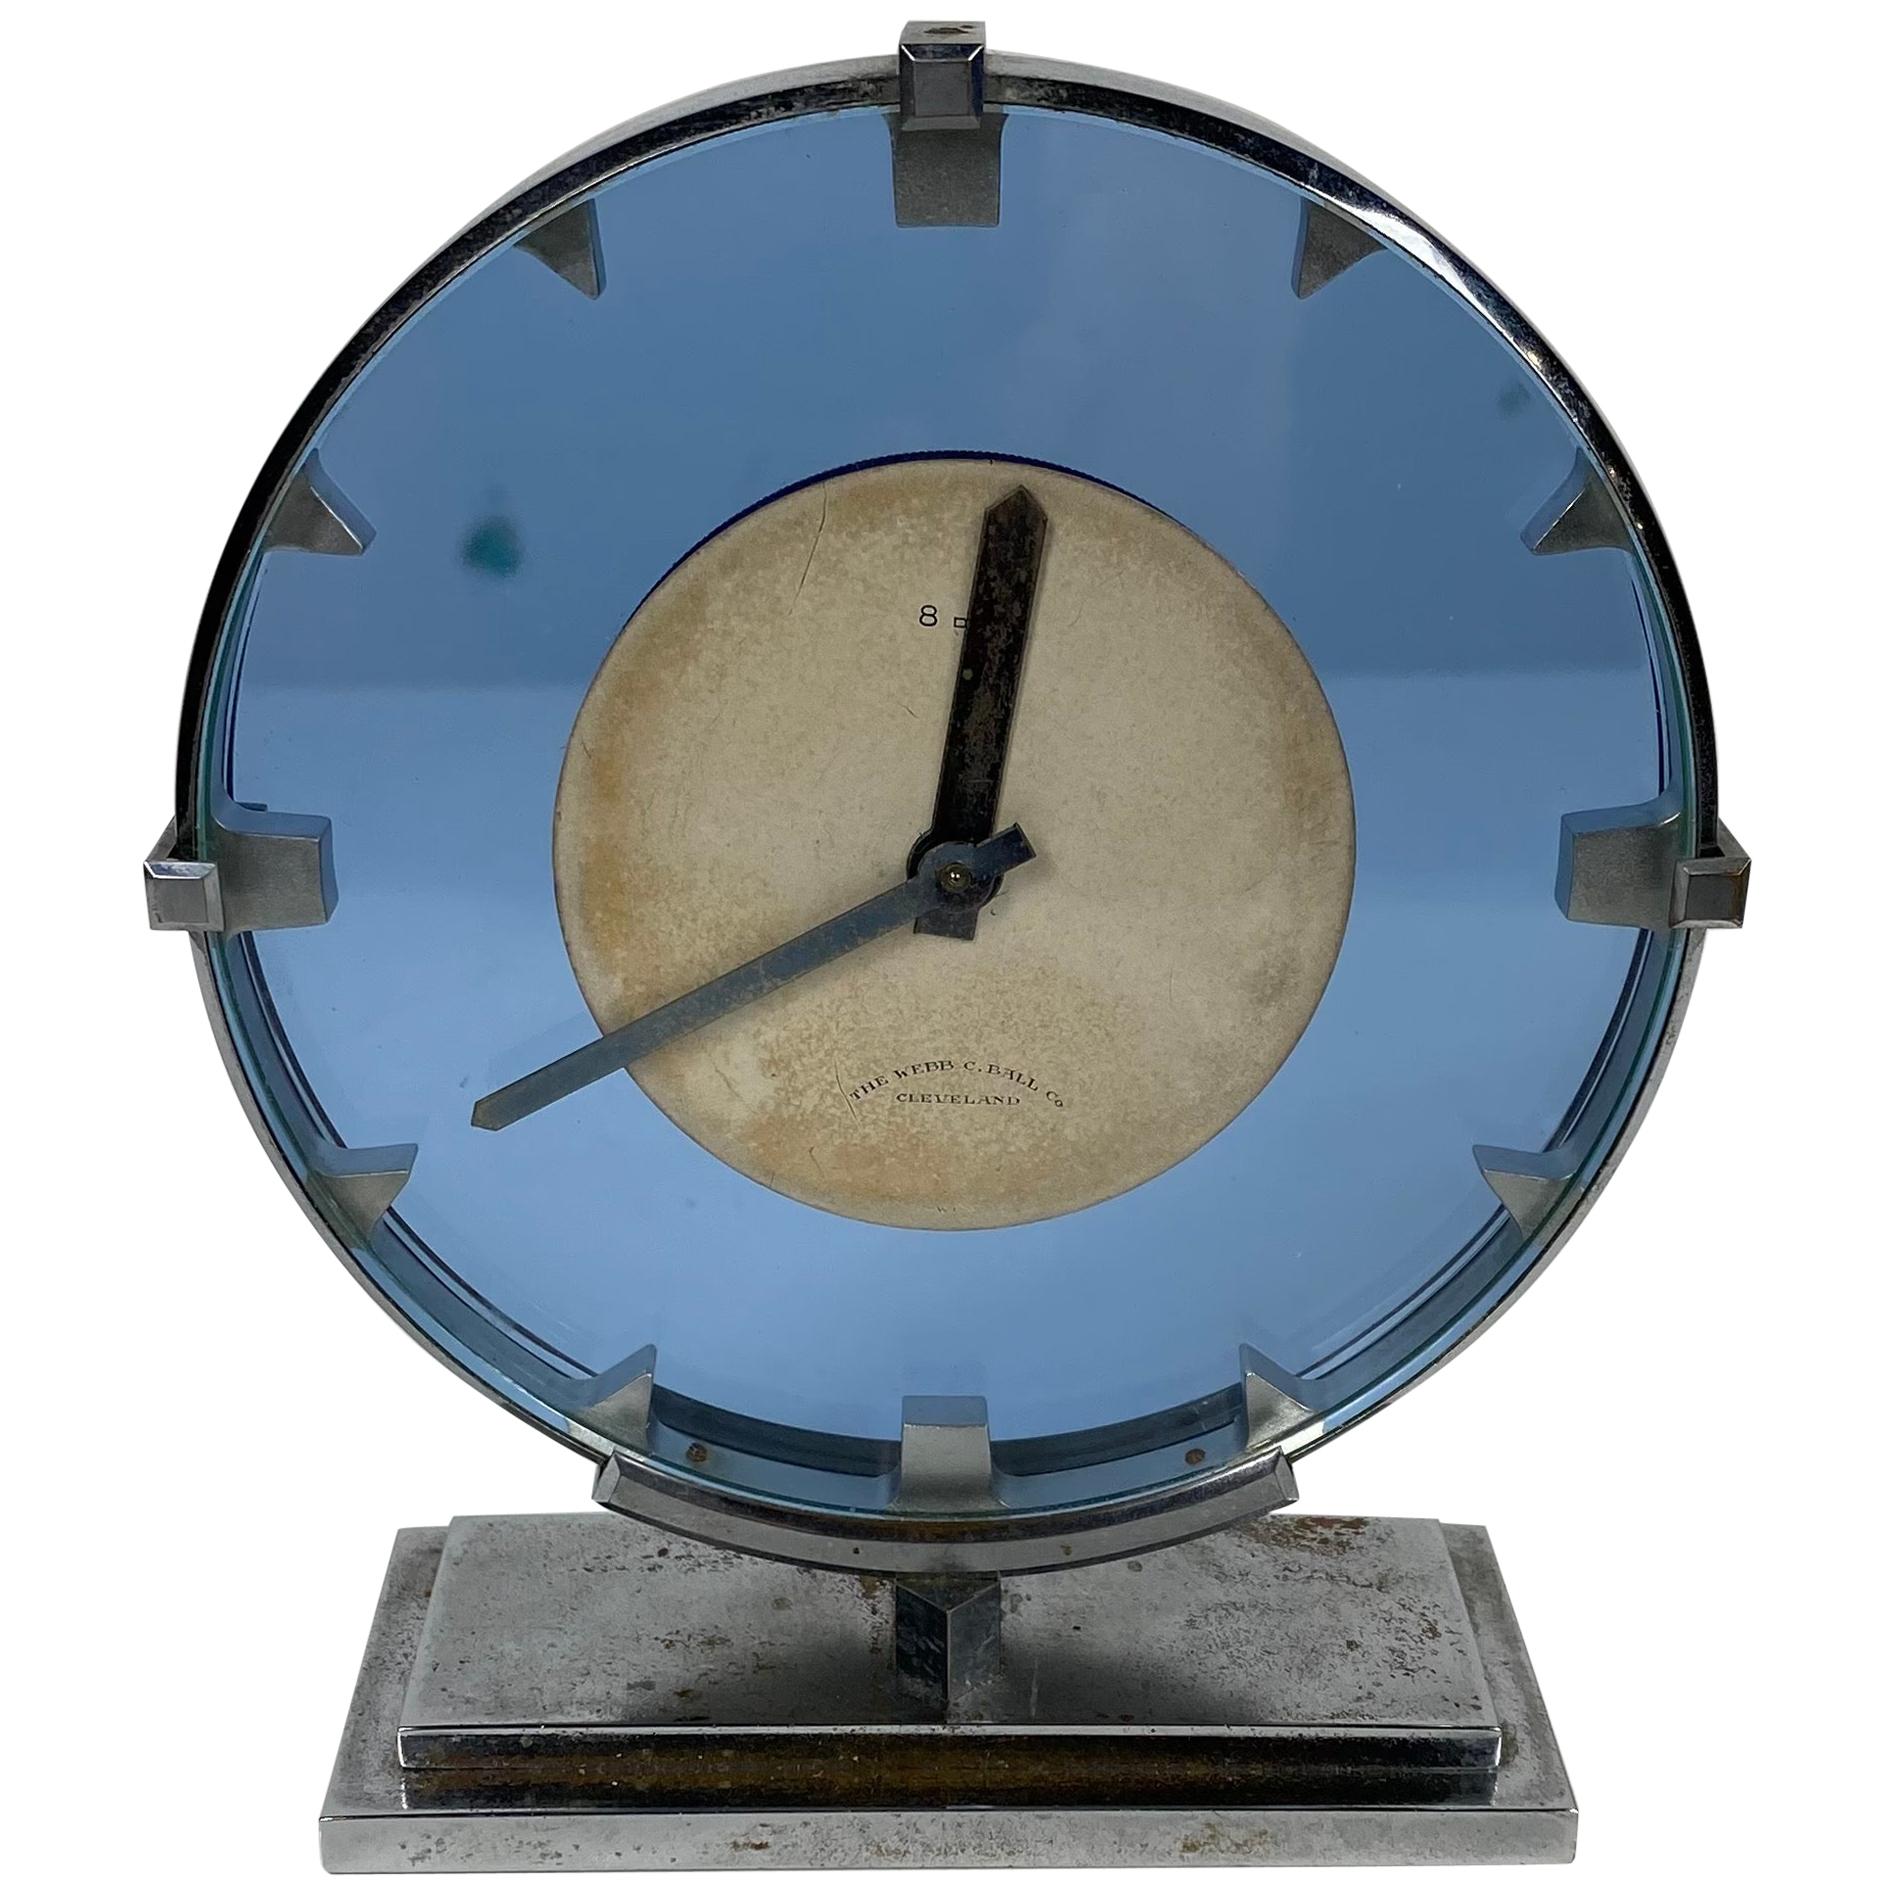 Stunning Stainless Steel and Blue Glass Art Deco / Machine Age Clock